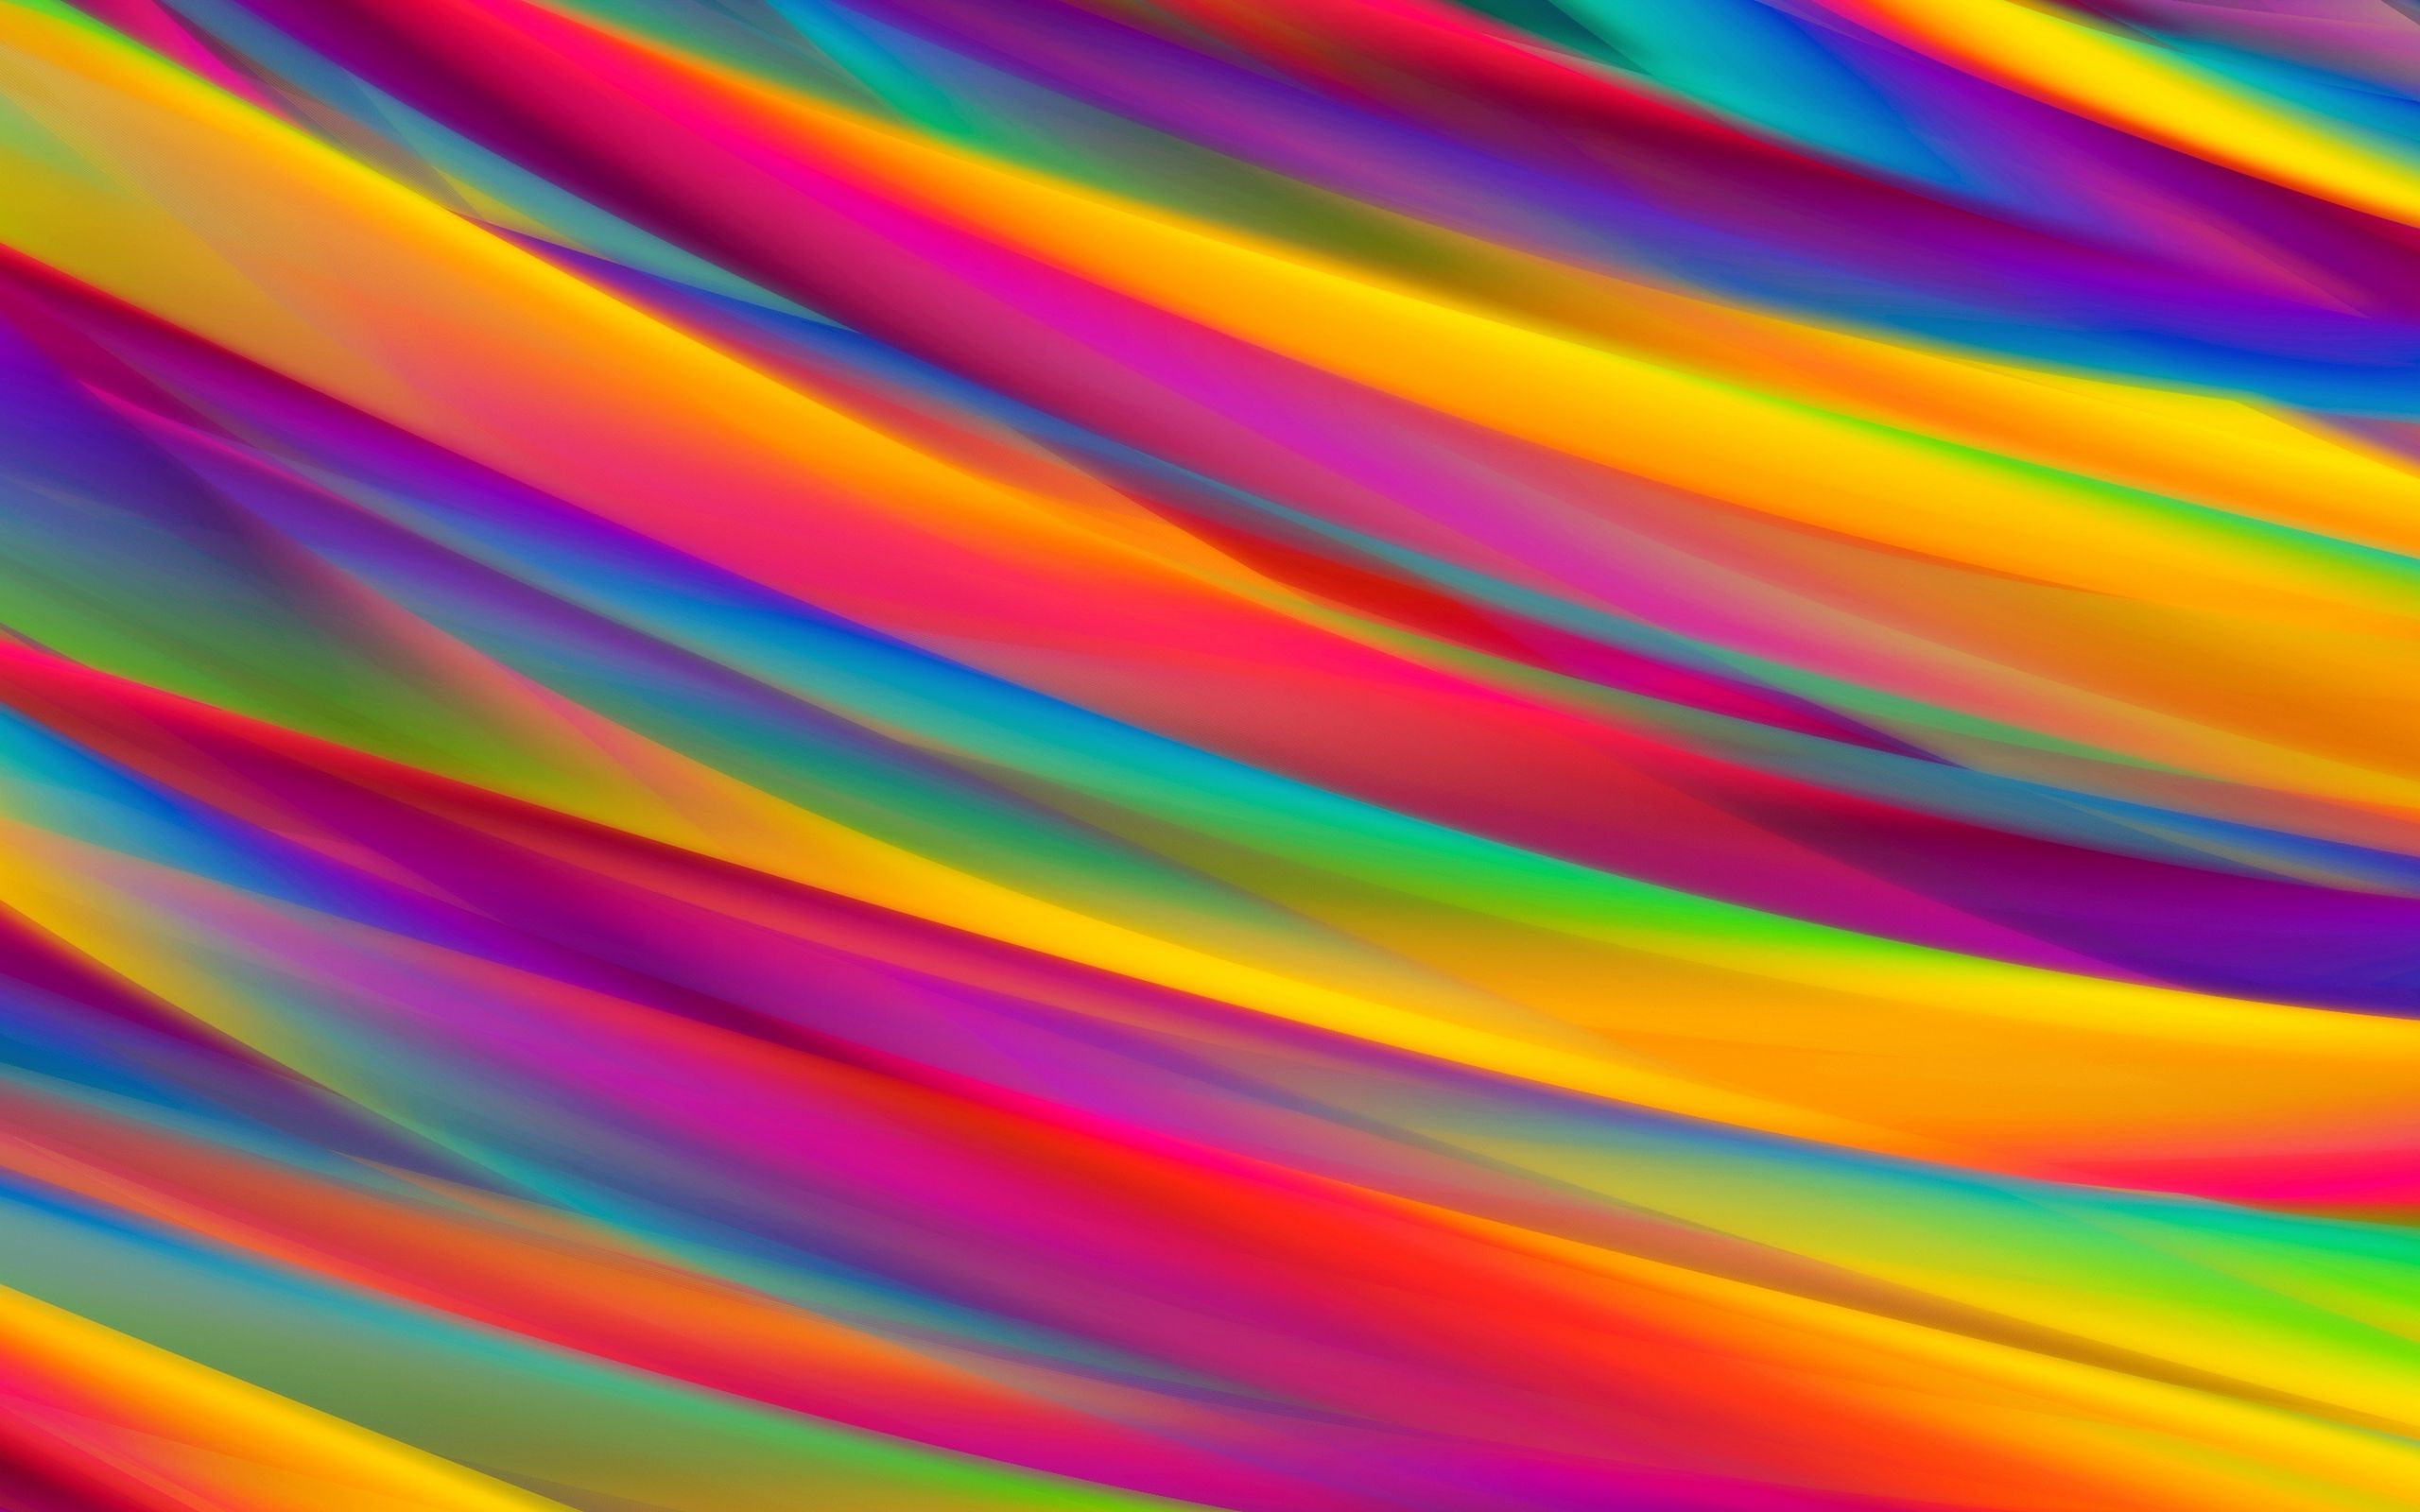 Download wallpaper multicolored waves, colorful waves, rainbow, abstract art, creative, abstract waves for desktop with resolution 2560x1600. High Quality HD picture wallpaper